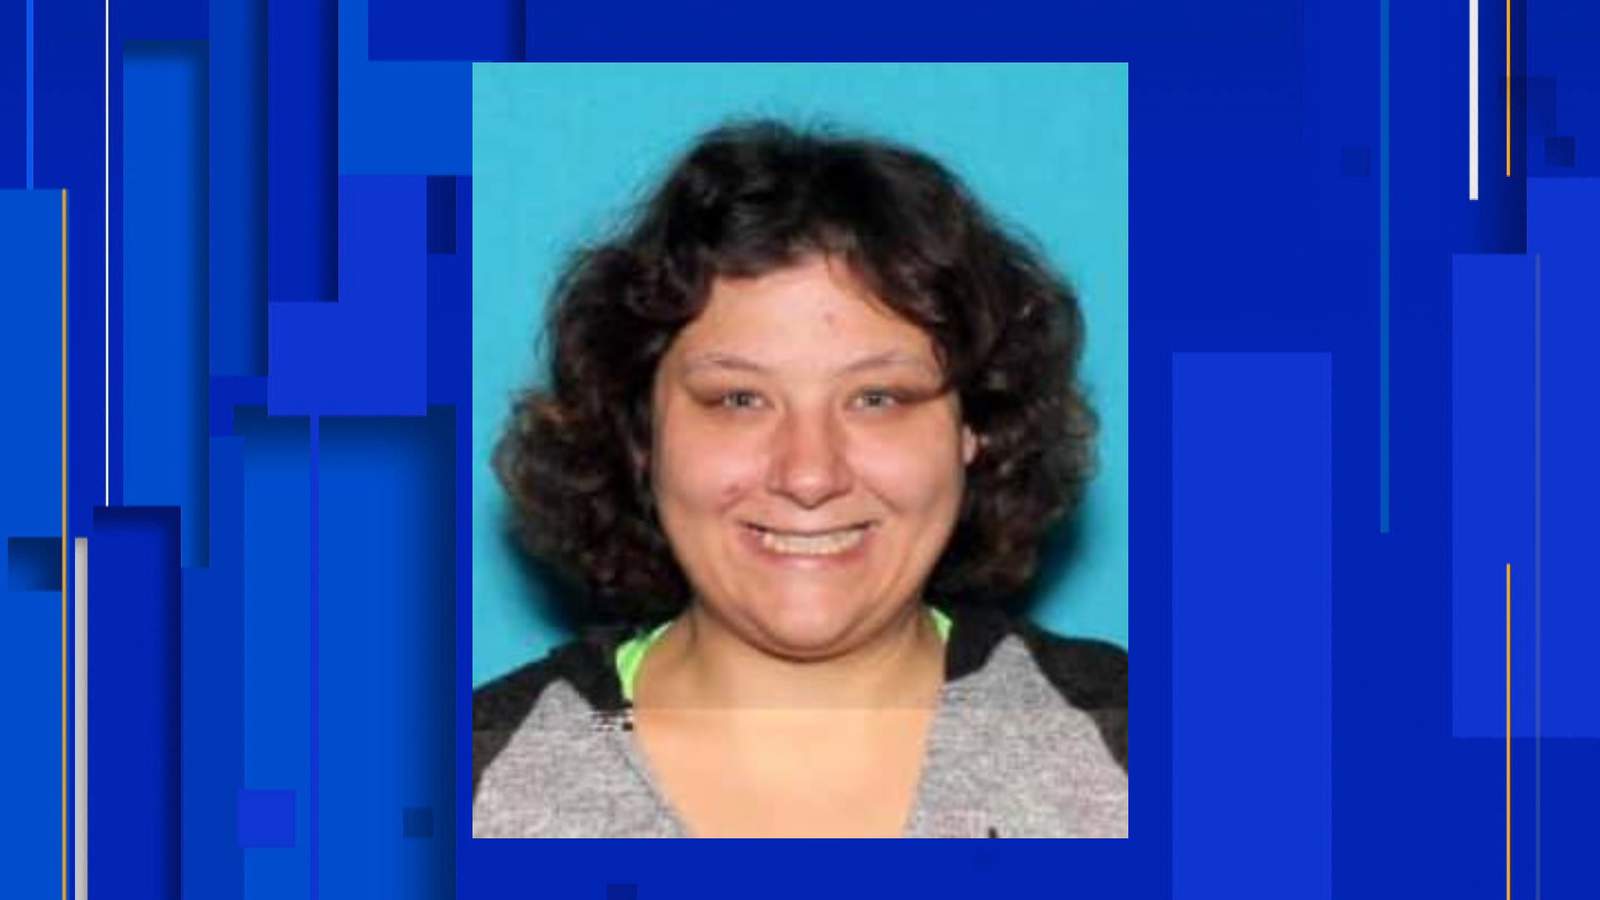 Dearborn Heights police said missing 32-year-old woman walked away from group home on Annapolis Street